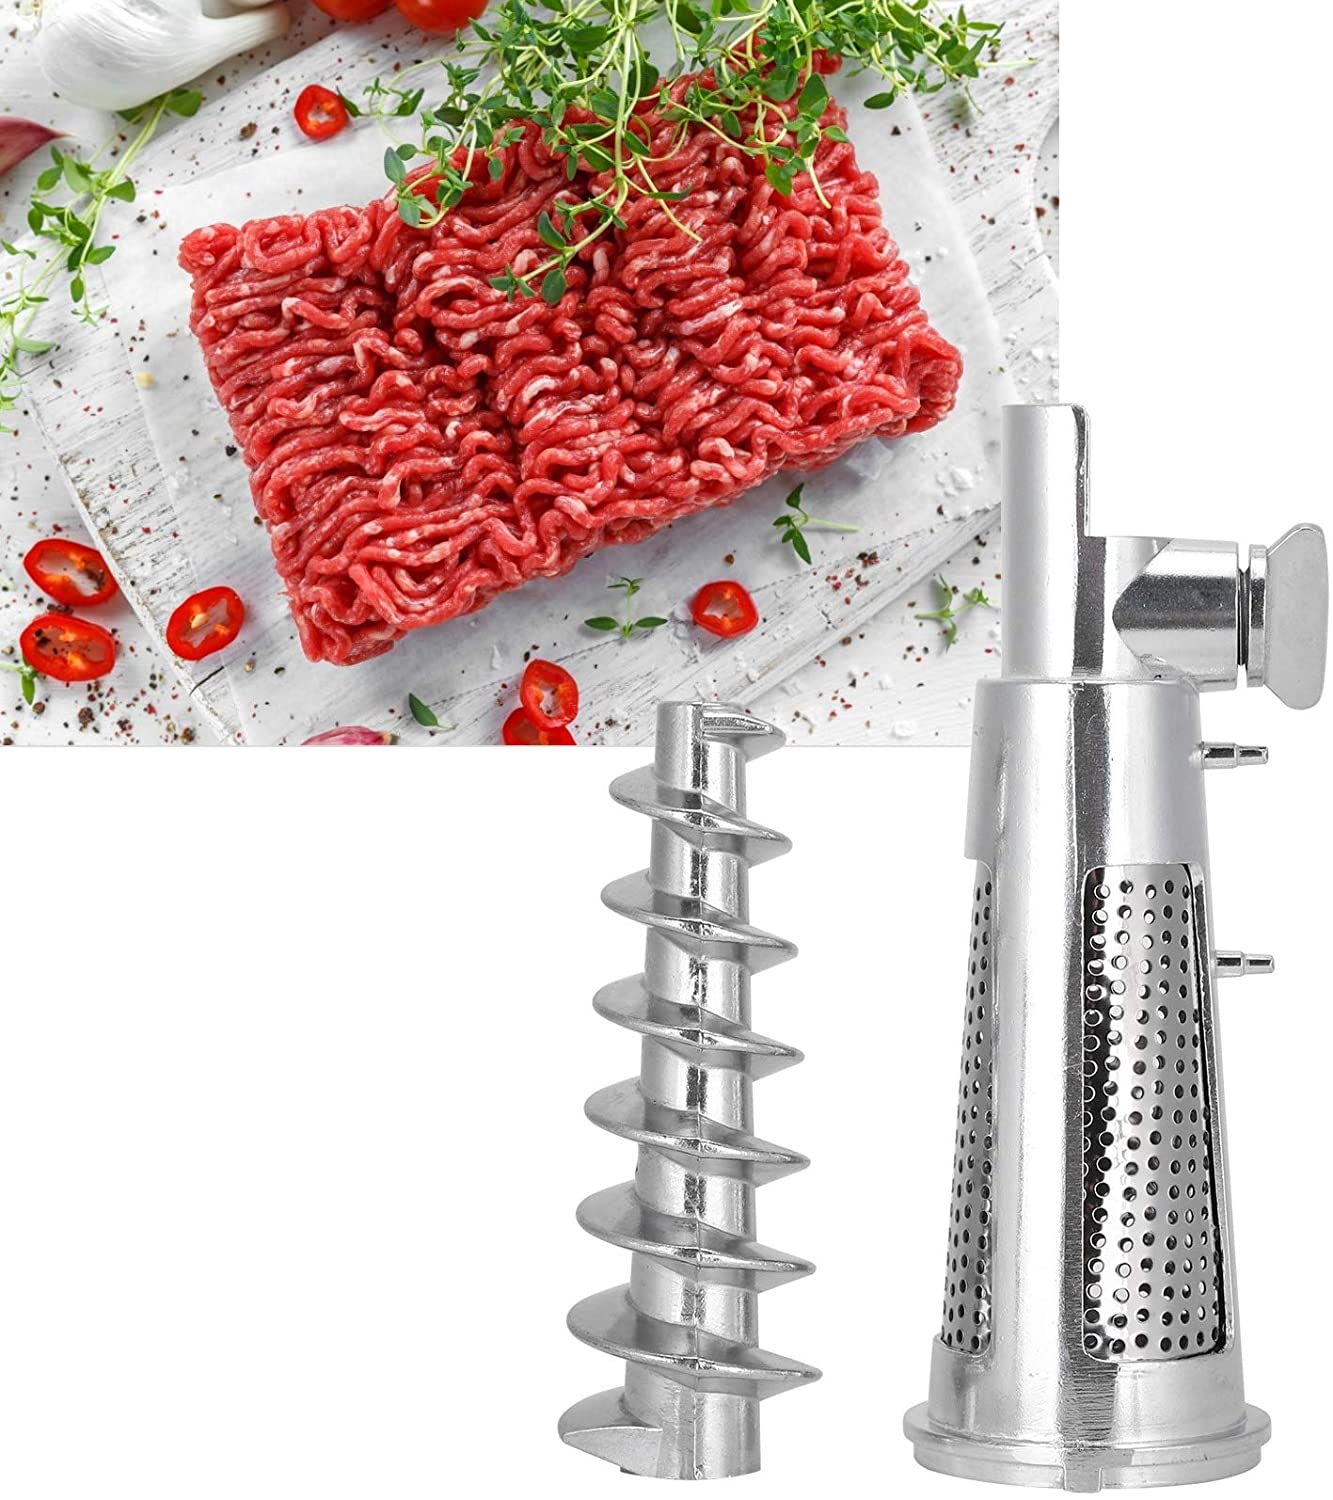 Hozee Meat grinder parts, smooth appearance Meat Grinder Accessories High Quality